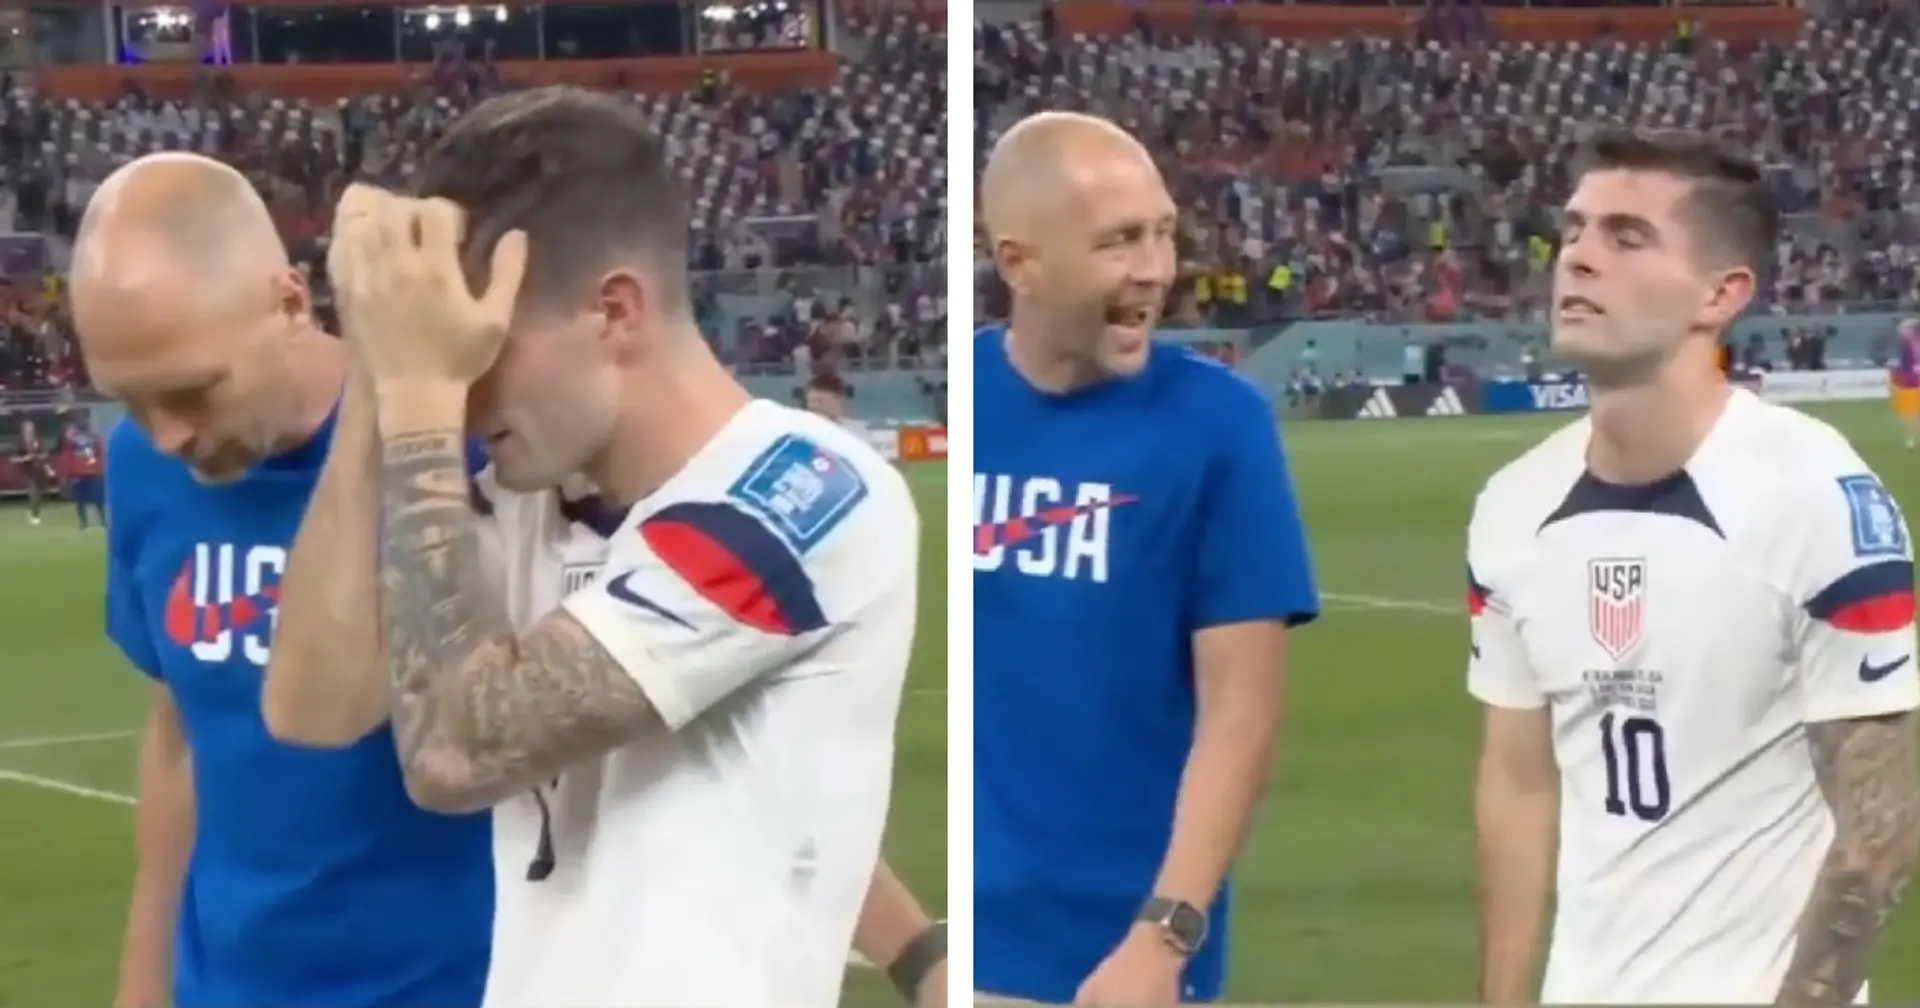 Pulisic left heartbroken as USA knocked out of World Cup by Netherlands (video)